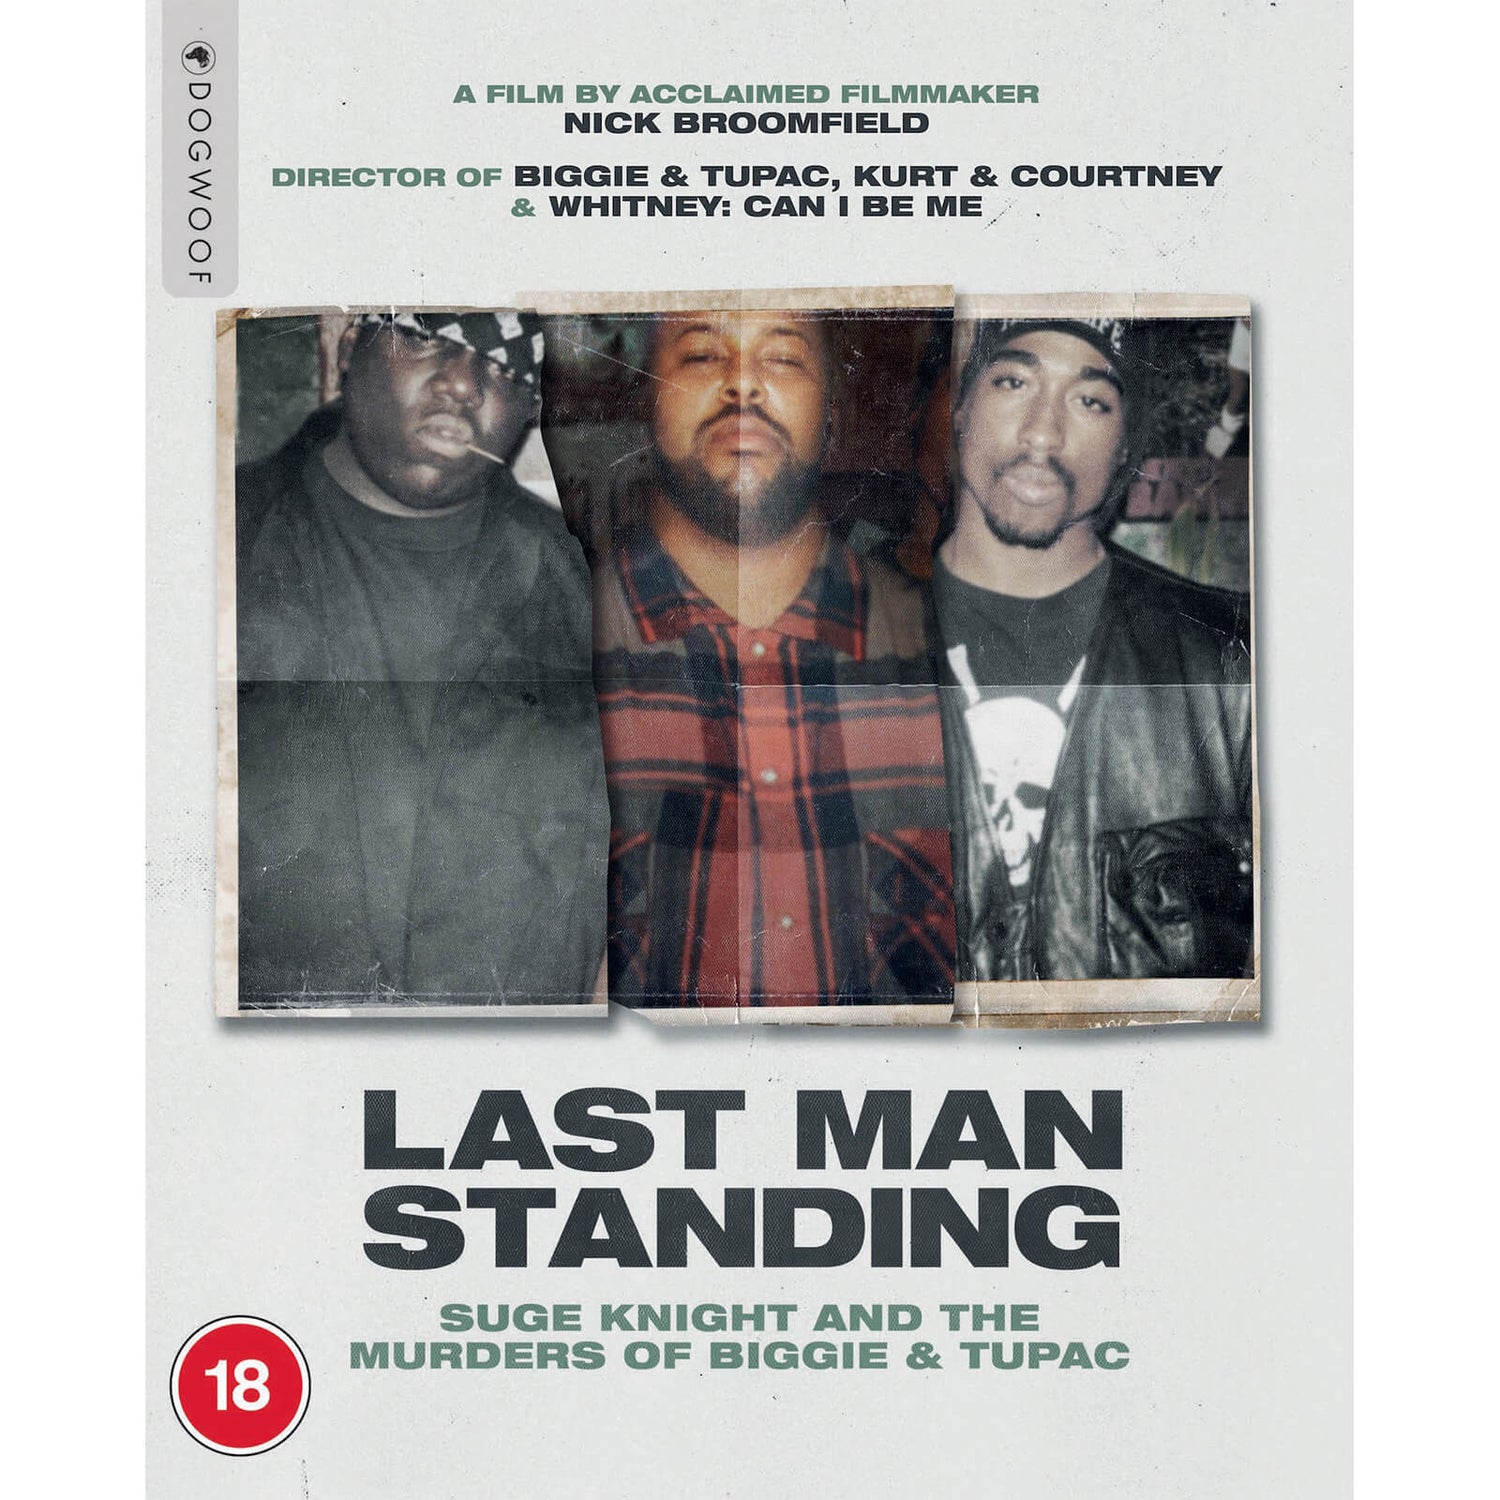 Last Man Standing: Suge Knight and the Murders of Biggie & Tupac